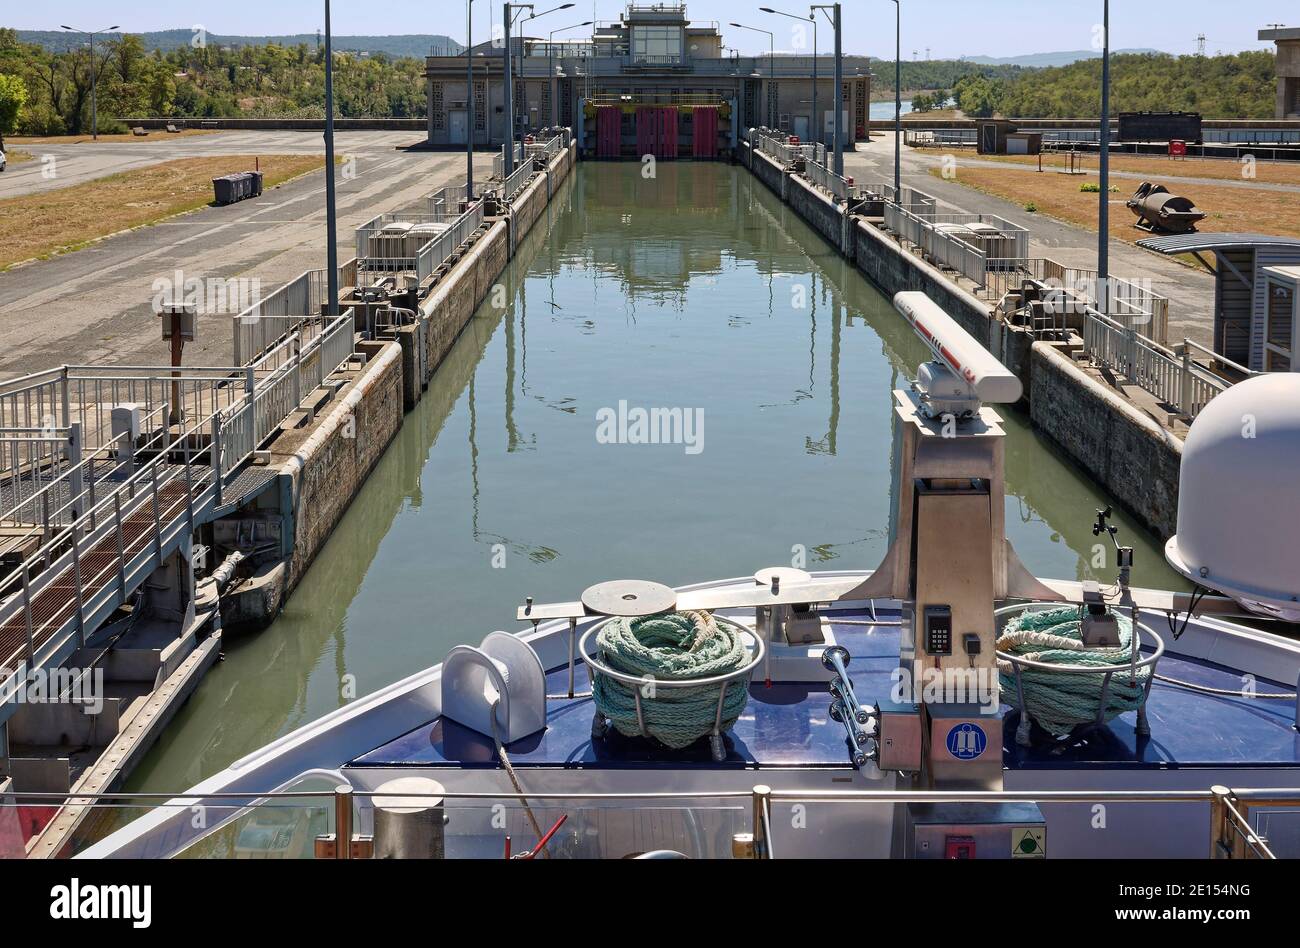 boat in Bollene Lock, Rhone River, 71 foot water level difference, engineering feat, travel, transport, narrow canal, Provence, France, summer Stock Photo